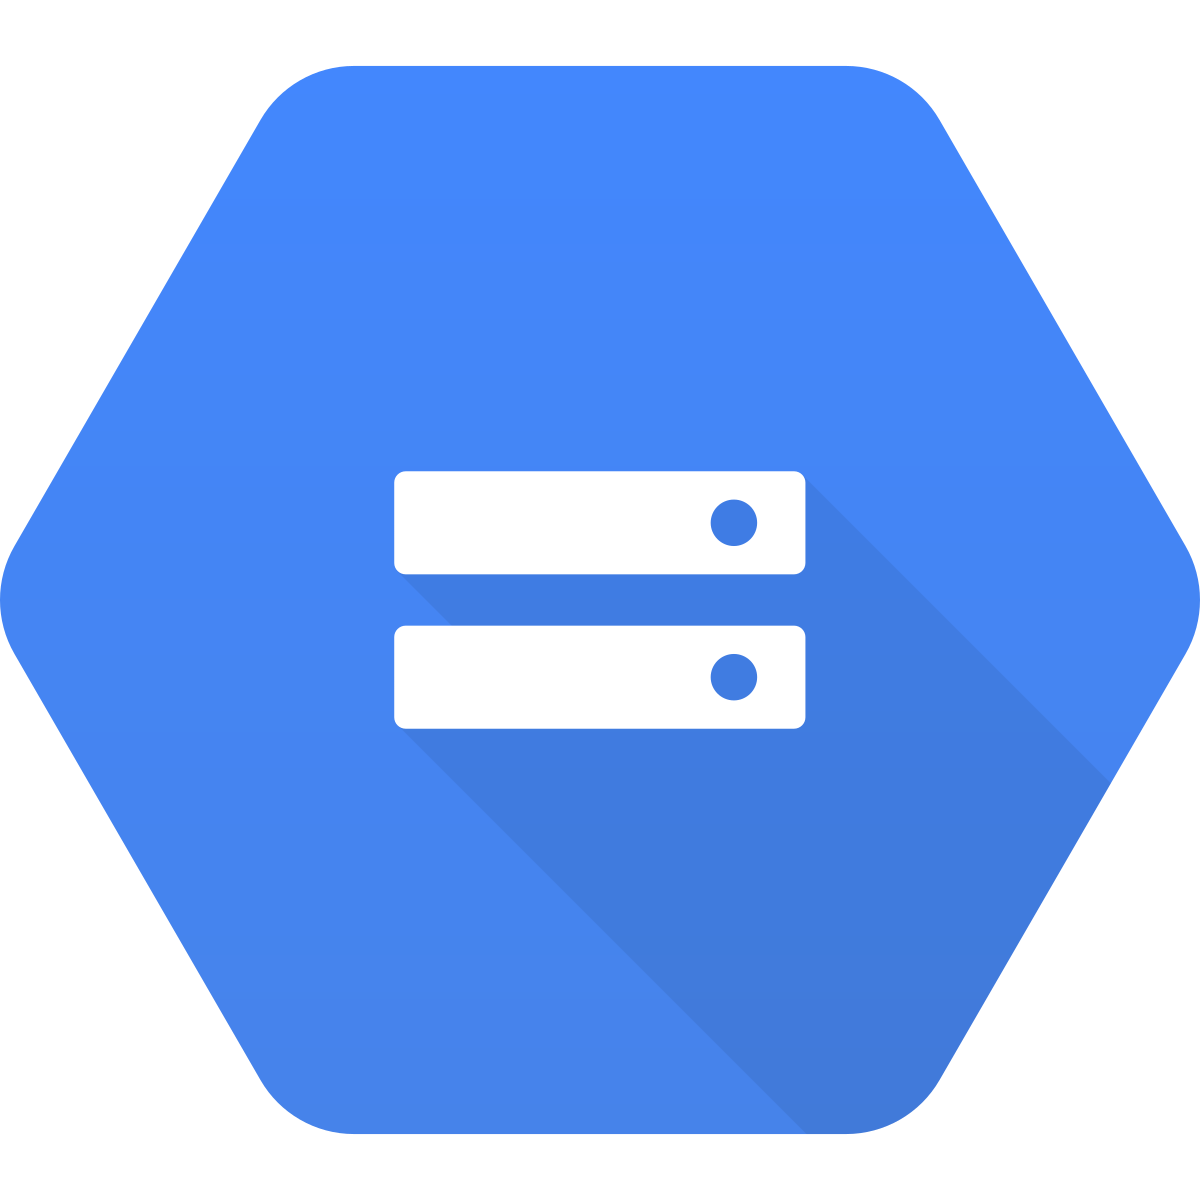 Sync data from Google Cloud Storage to Google Sheets (Service Account).